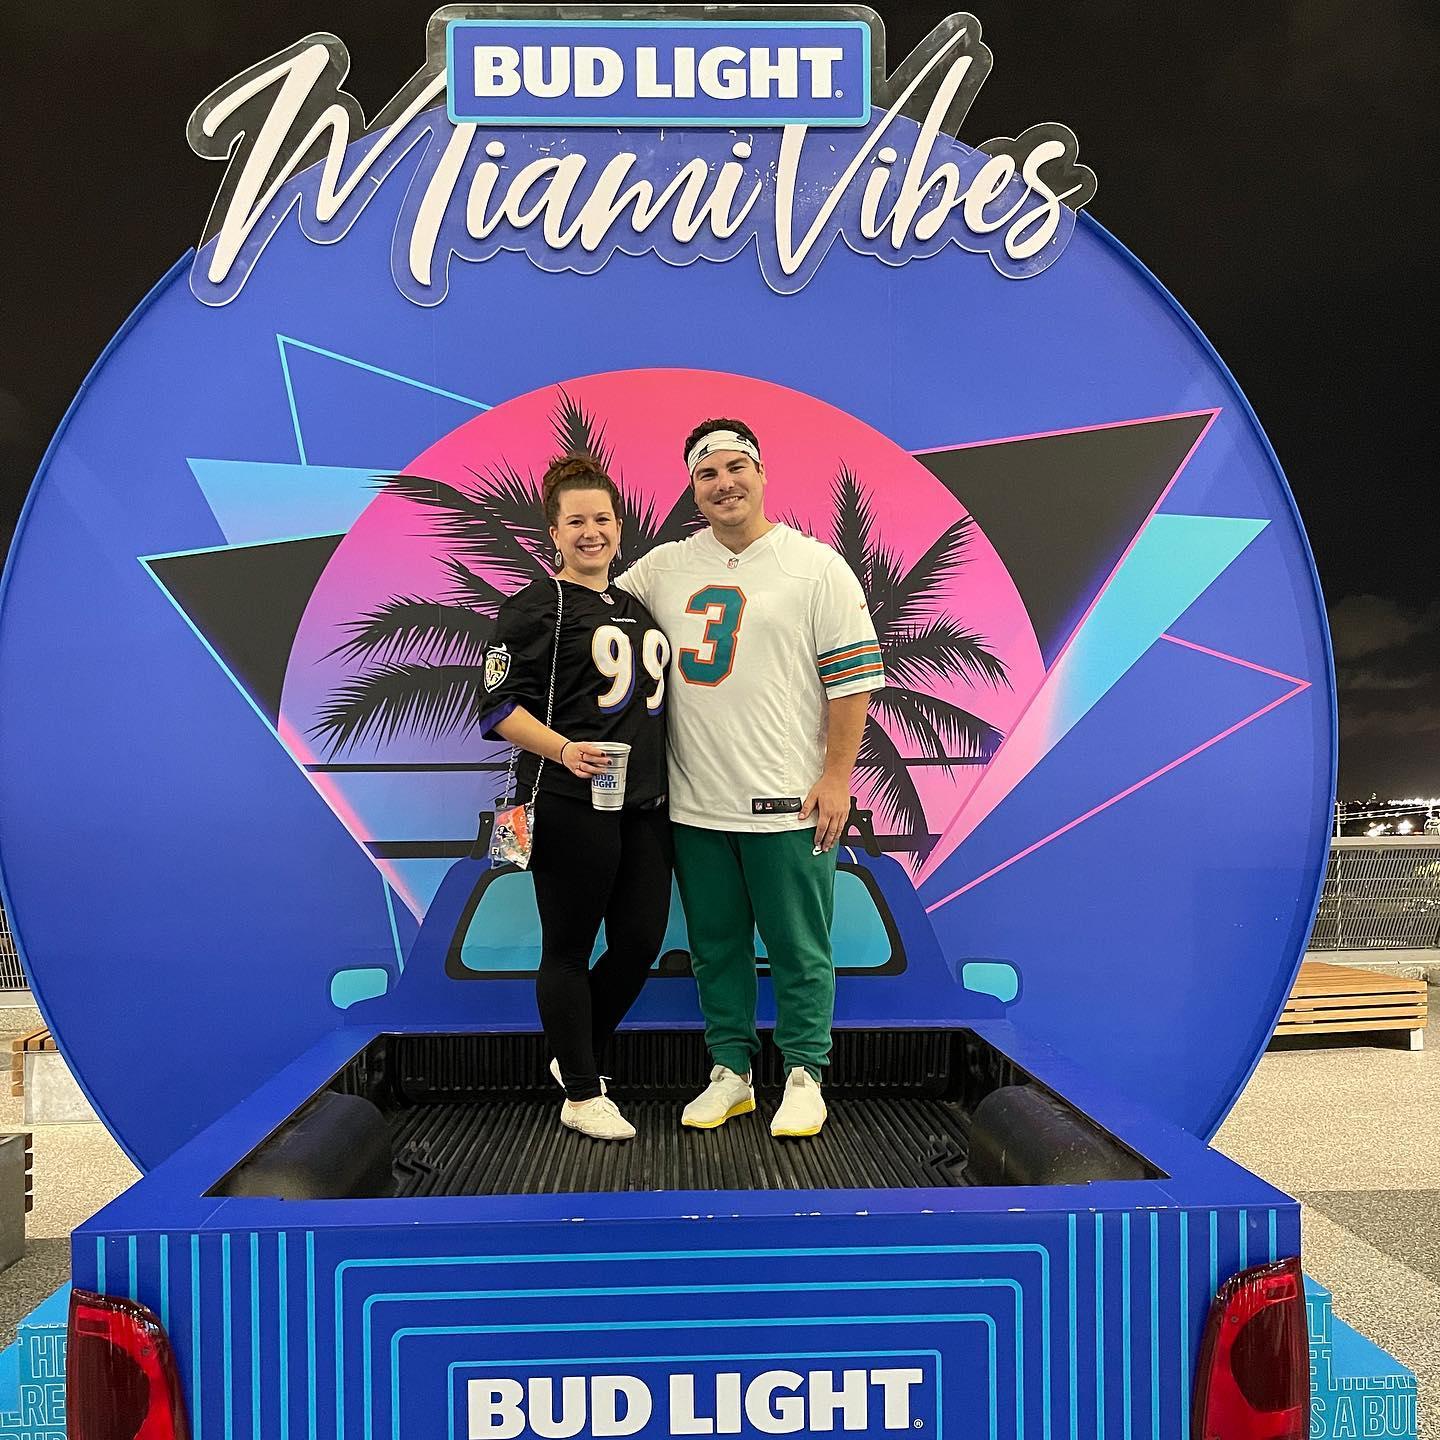 Annual Dolphins/Ravens games have become a fun tradition (Lauren would have more fun if the Ravens would stop losing to the Dolphins every year)